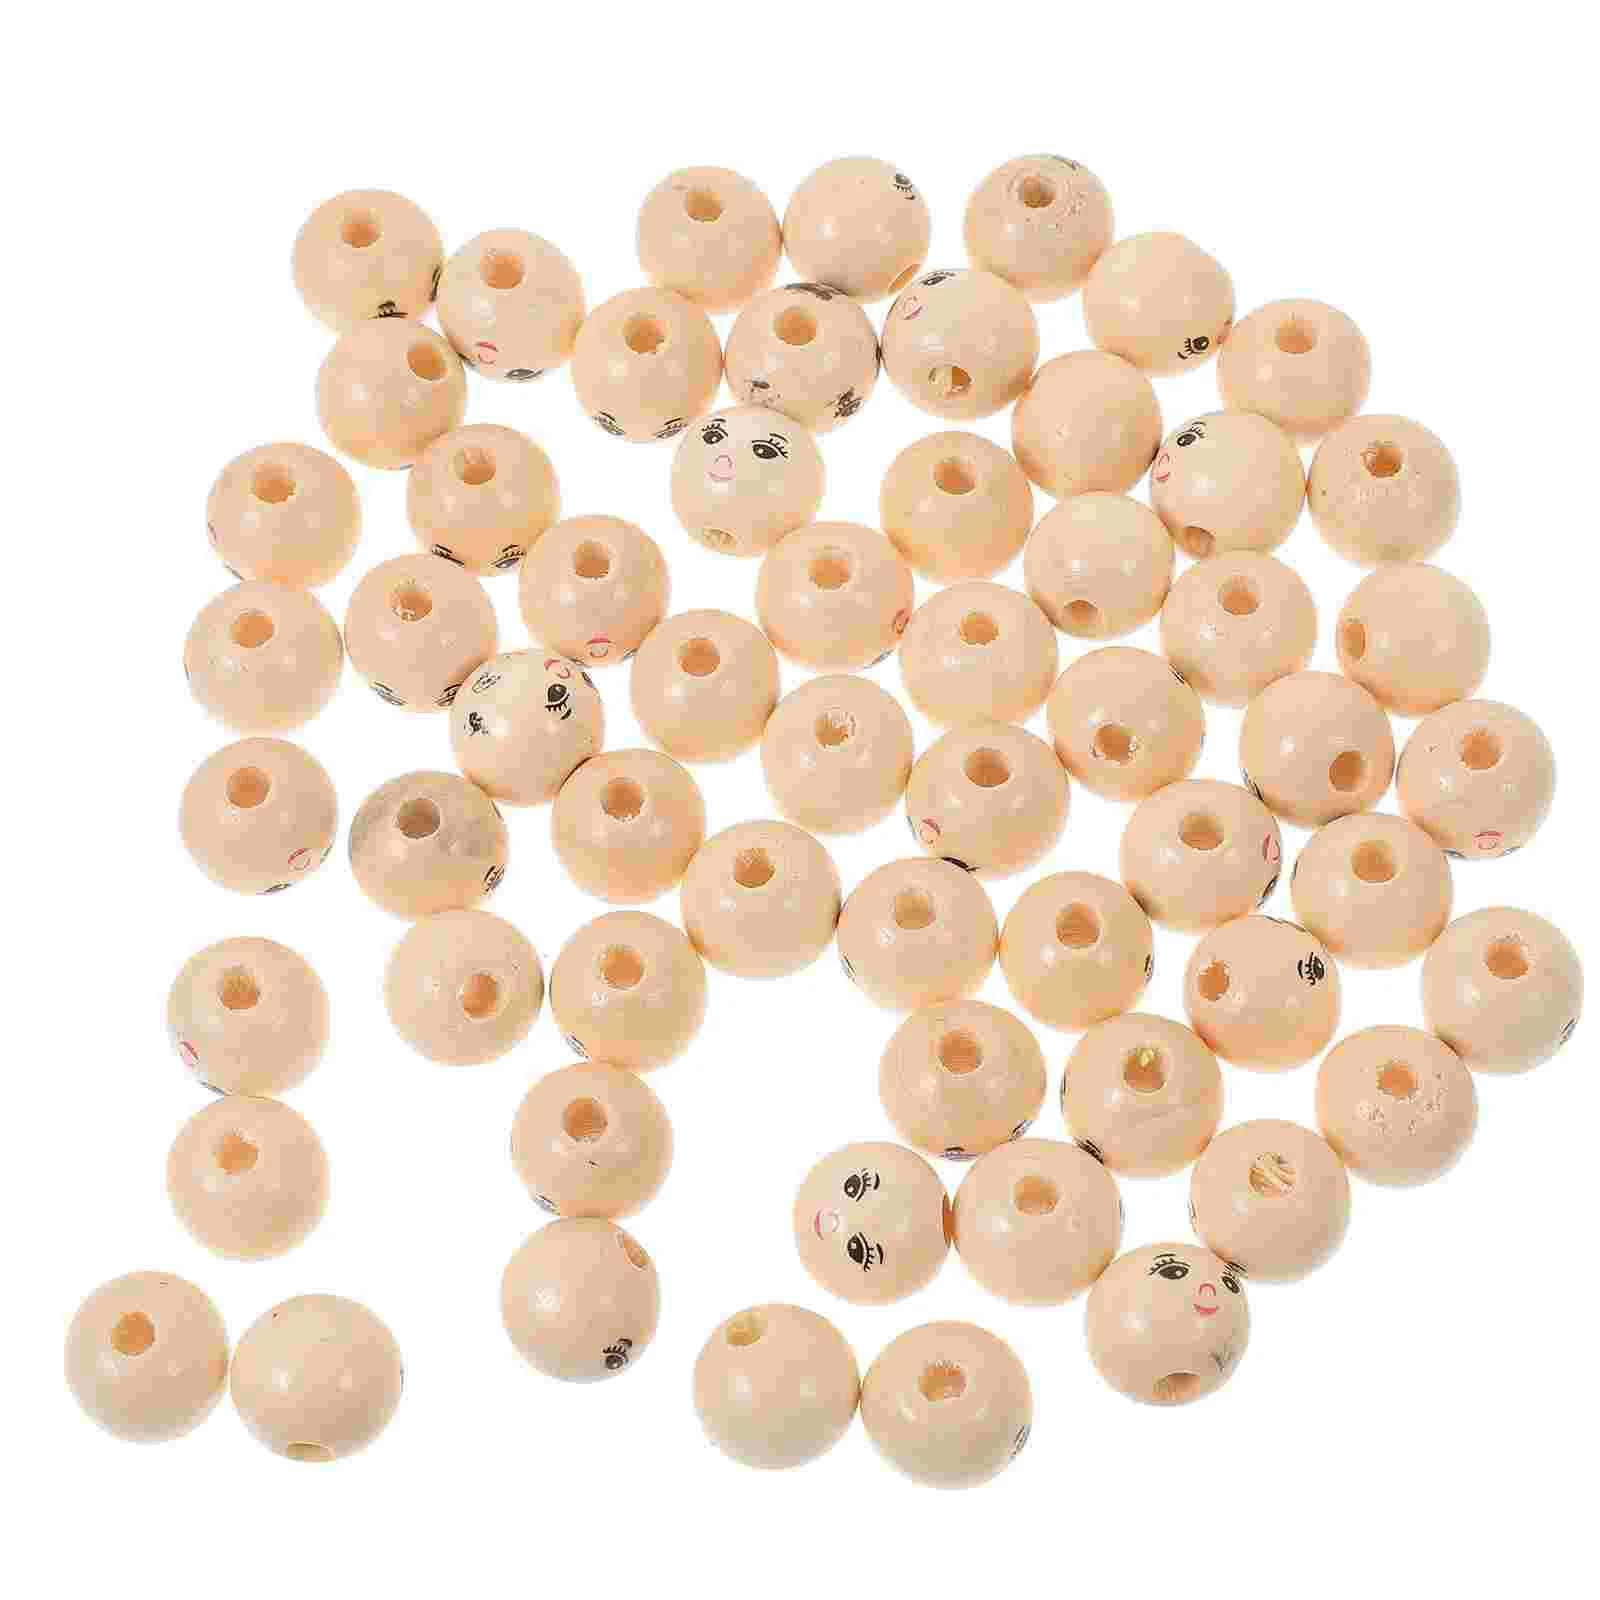 

Garland DIY Wooden Beads Smile Face Beads Craft Jewelry Making Loose Beads DIY Jewelry Bracelet Necklace Making Beading